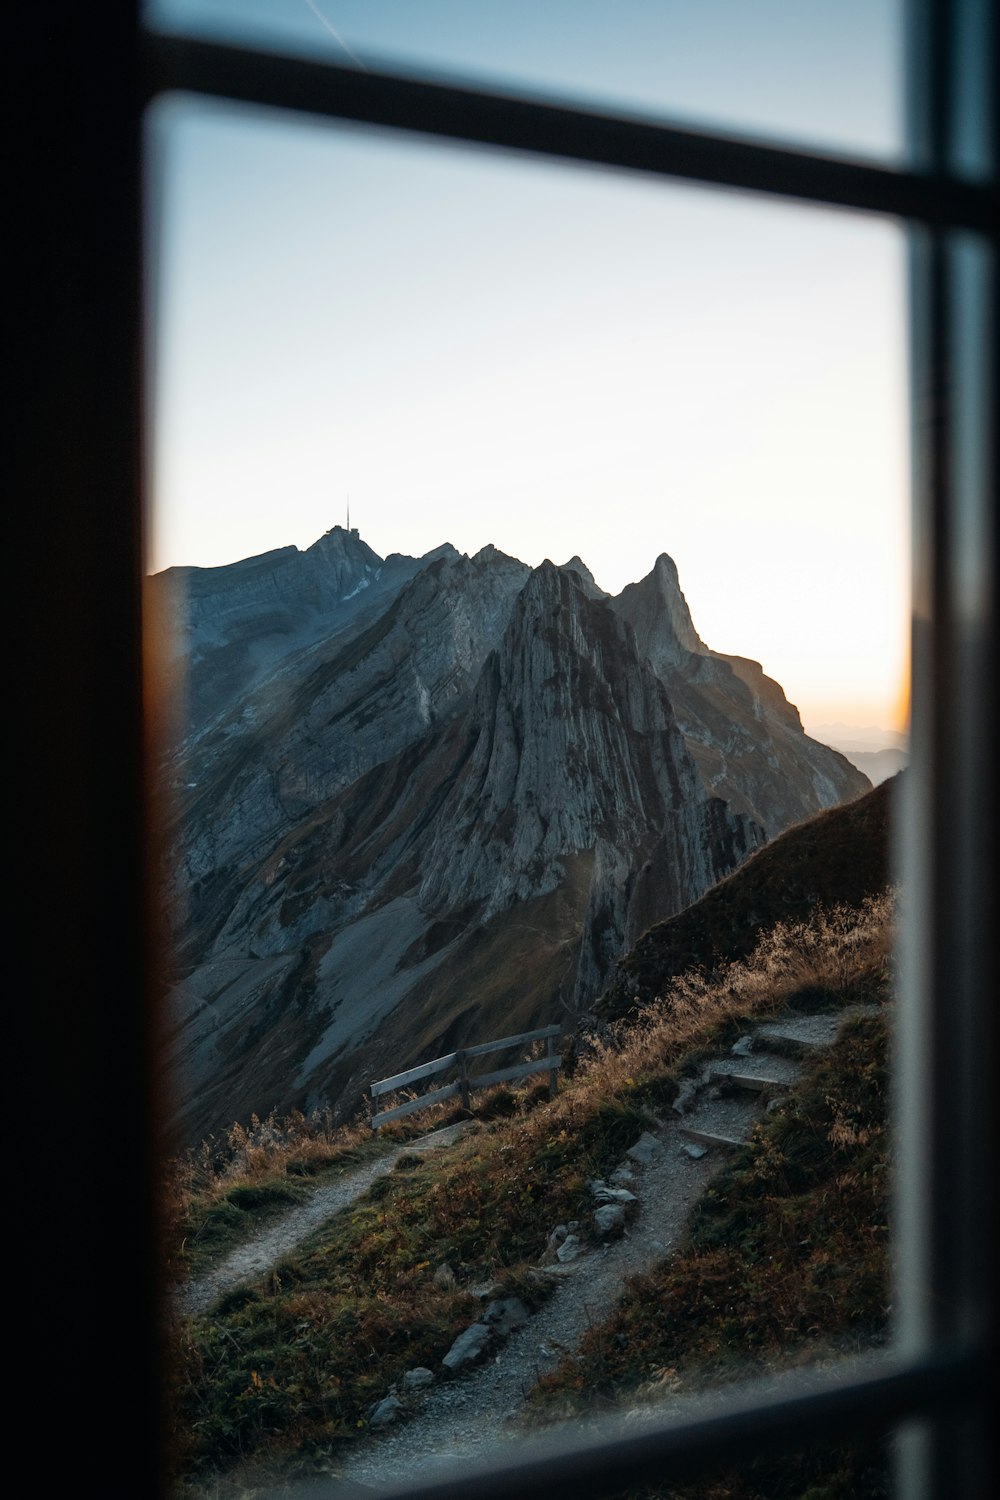 a view of a mountain from a window